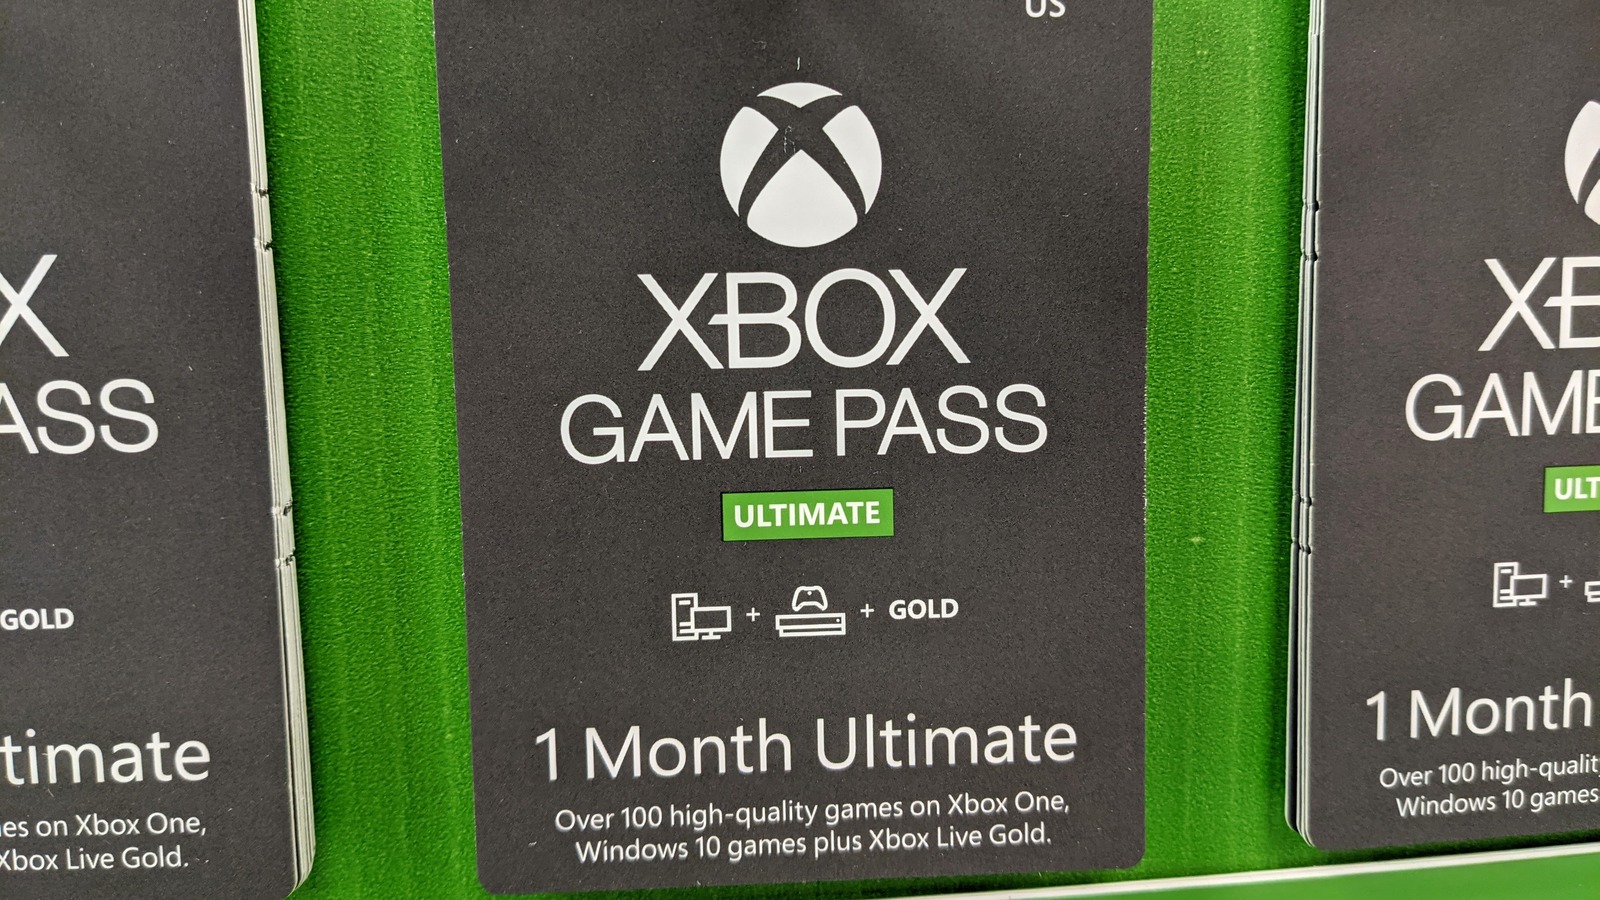 PSA: Xbox Game Pass prices go up today